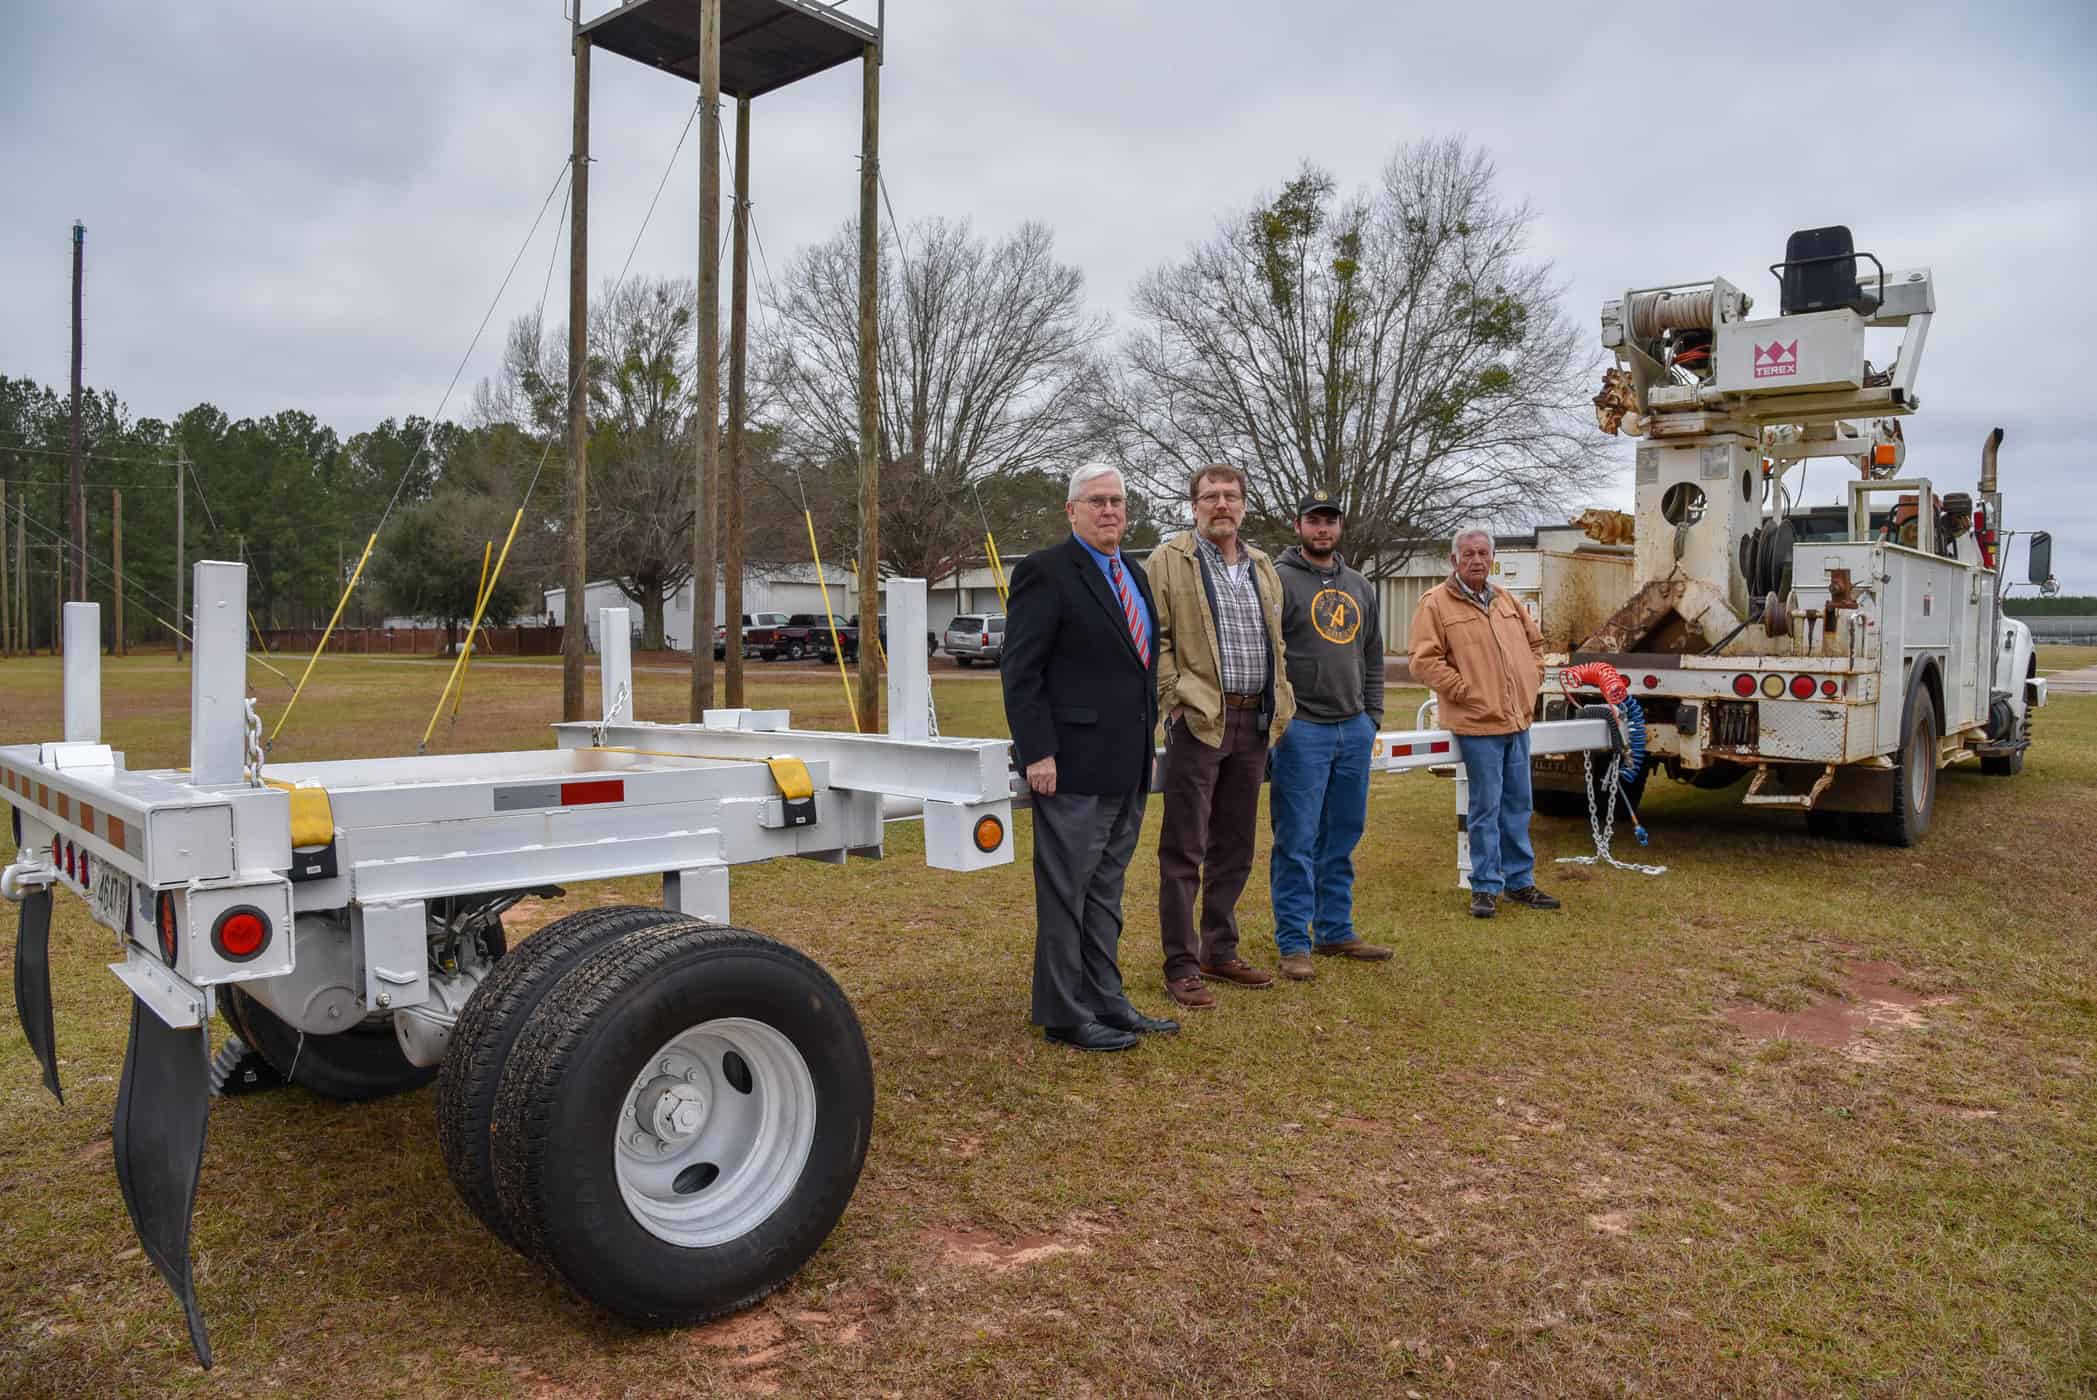 The pole trailer donated to the South Georgia Technical College Foundation for the Electrical Lineworker Program by Colquitt EMC and painted and refurbished by Diverse Power is shown above. South Georgia Technical College Vice President of Economic Development Wally Summers is shown above with Bubba Allen of Diverse Power, Tyler Flowers, a former SGTC lineworker student who now works for Diverse Power, along with Dewey Turner, SGTC Lineworker instructor.